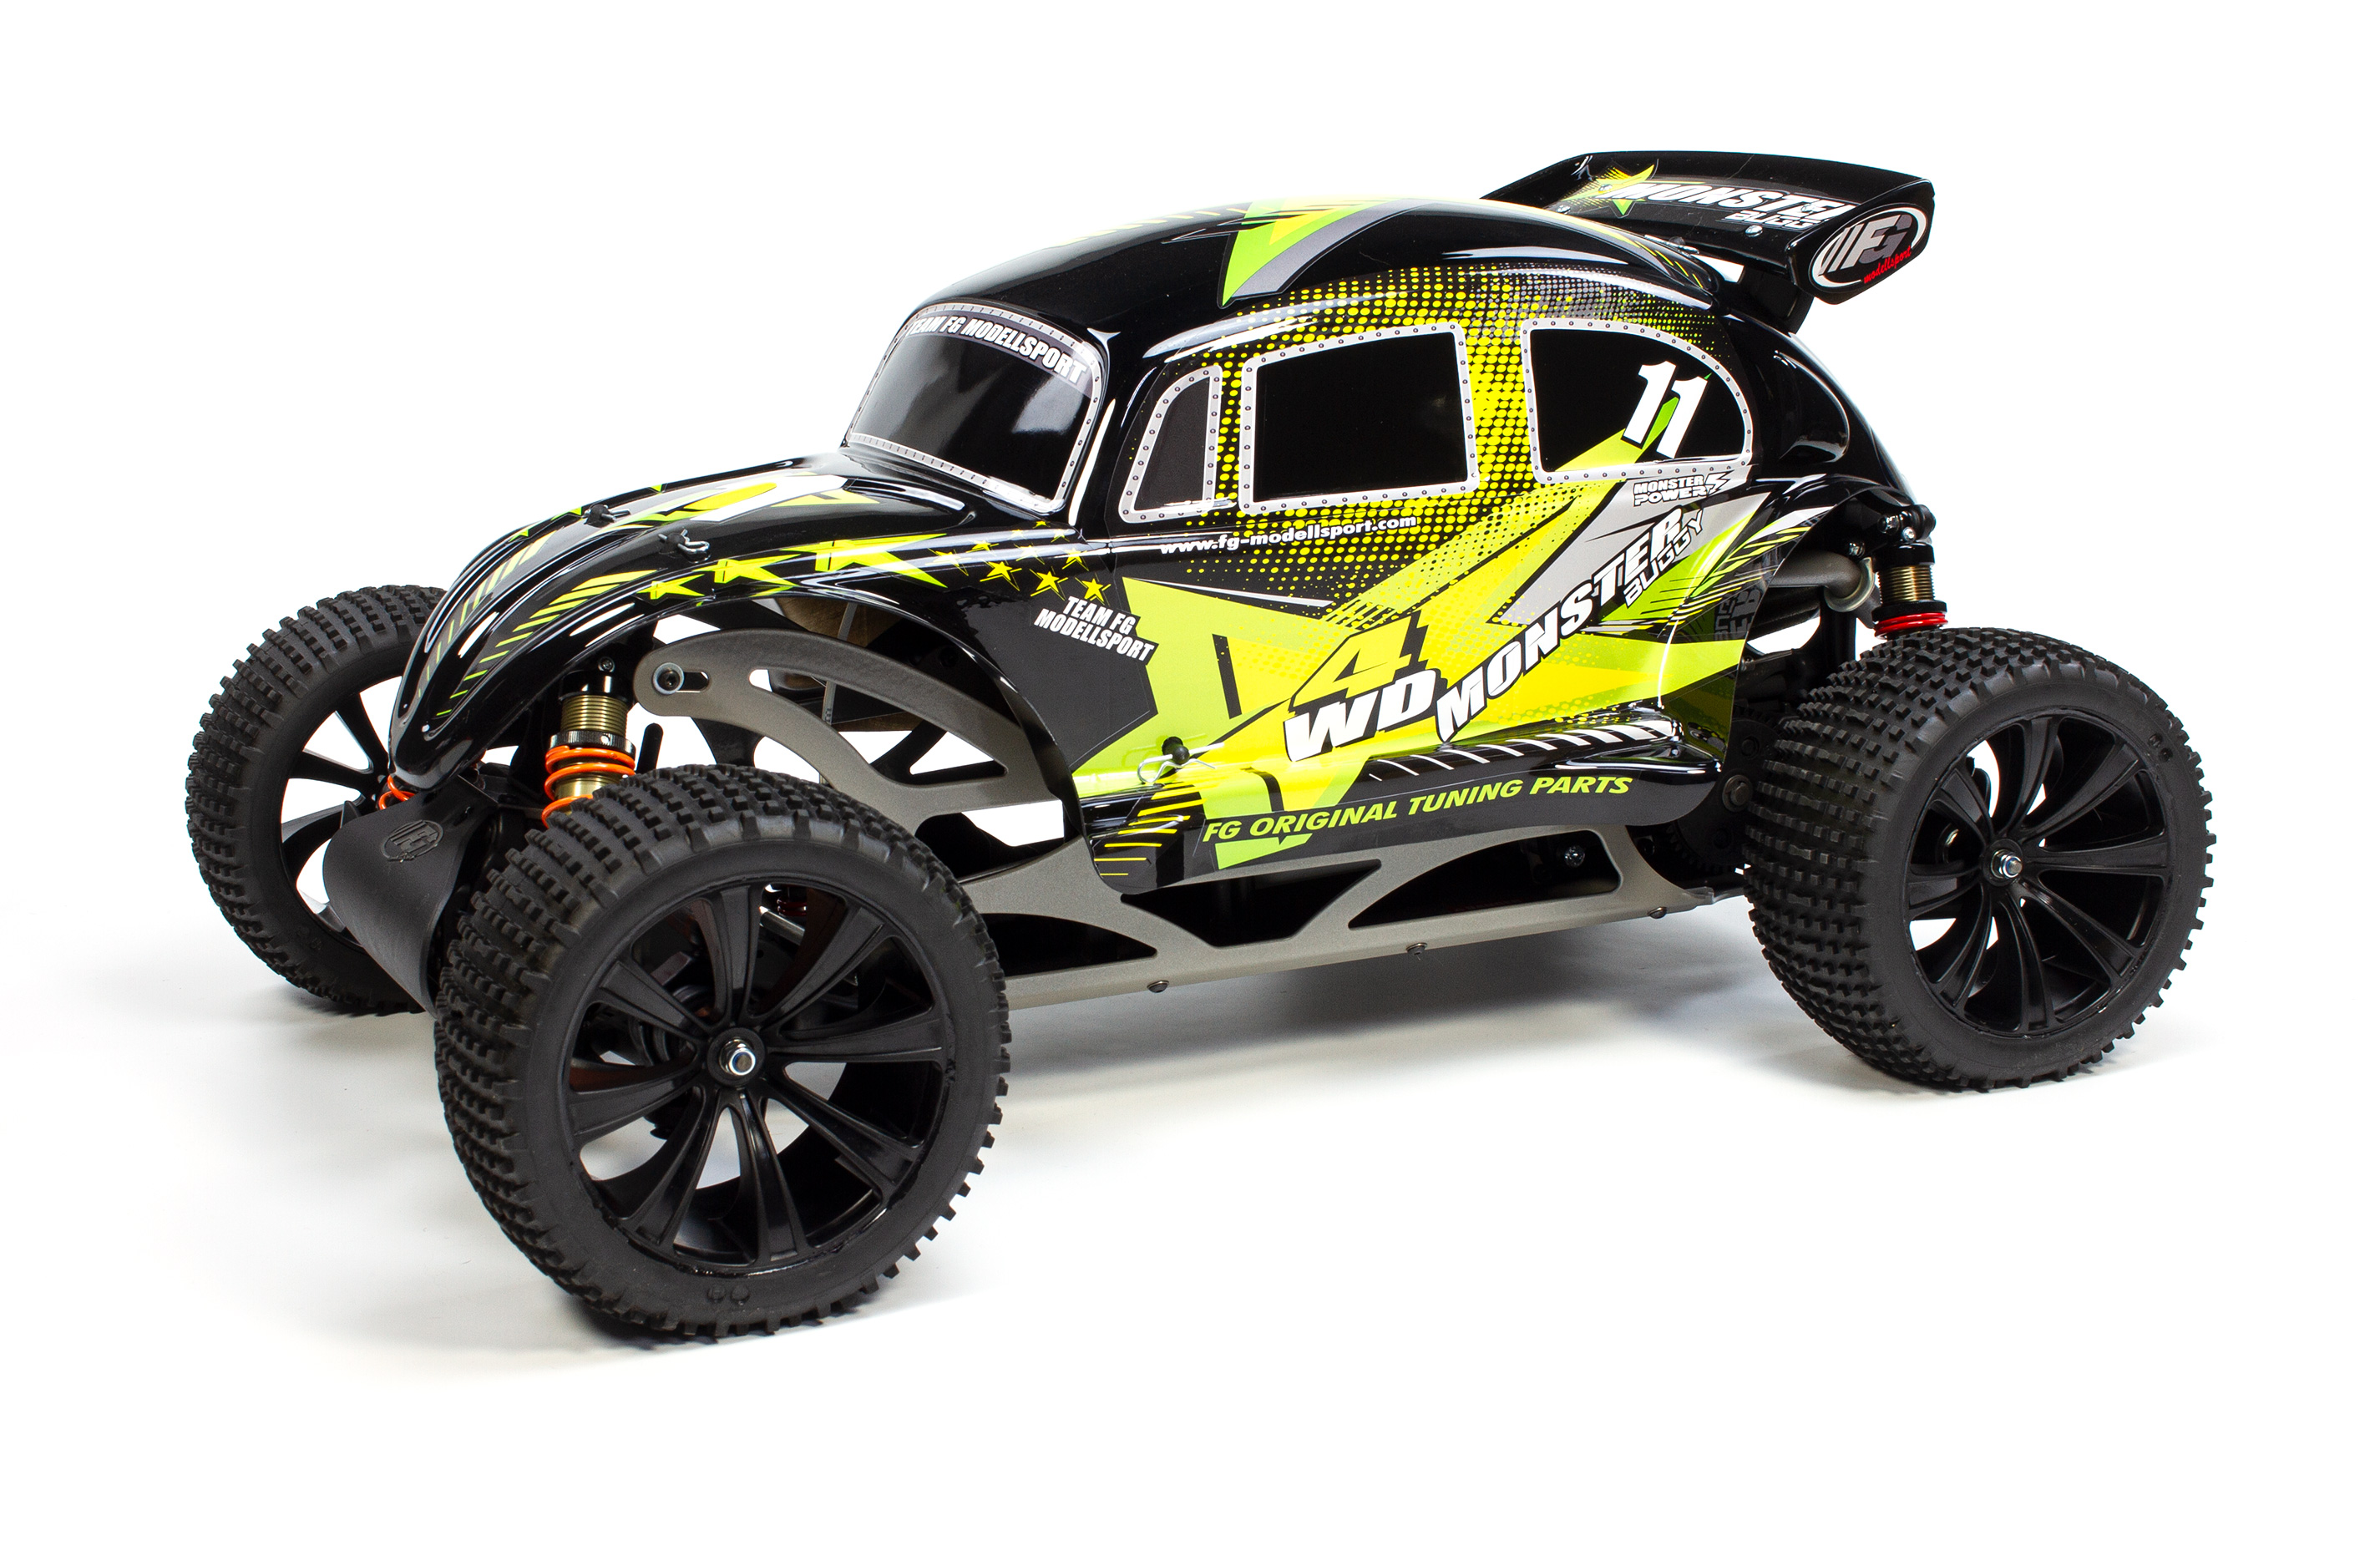 FG Monster Buggy Off-Road WB535 4WD with painted Body Shell